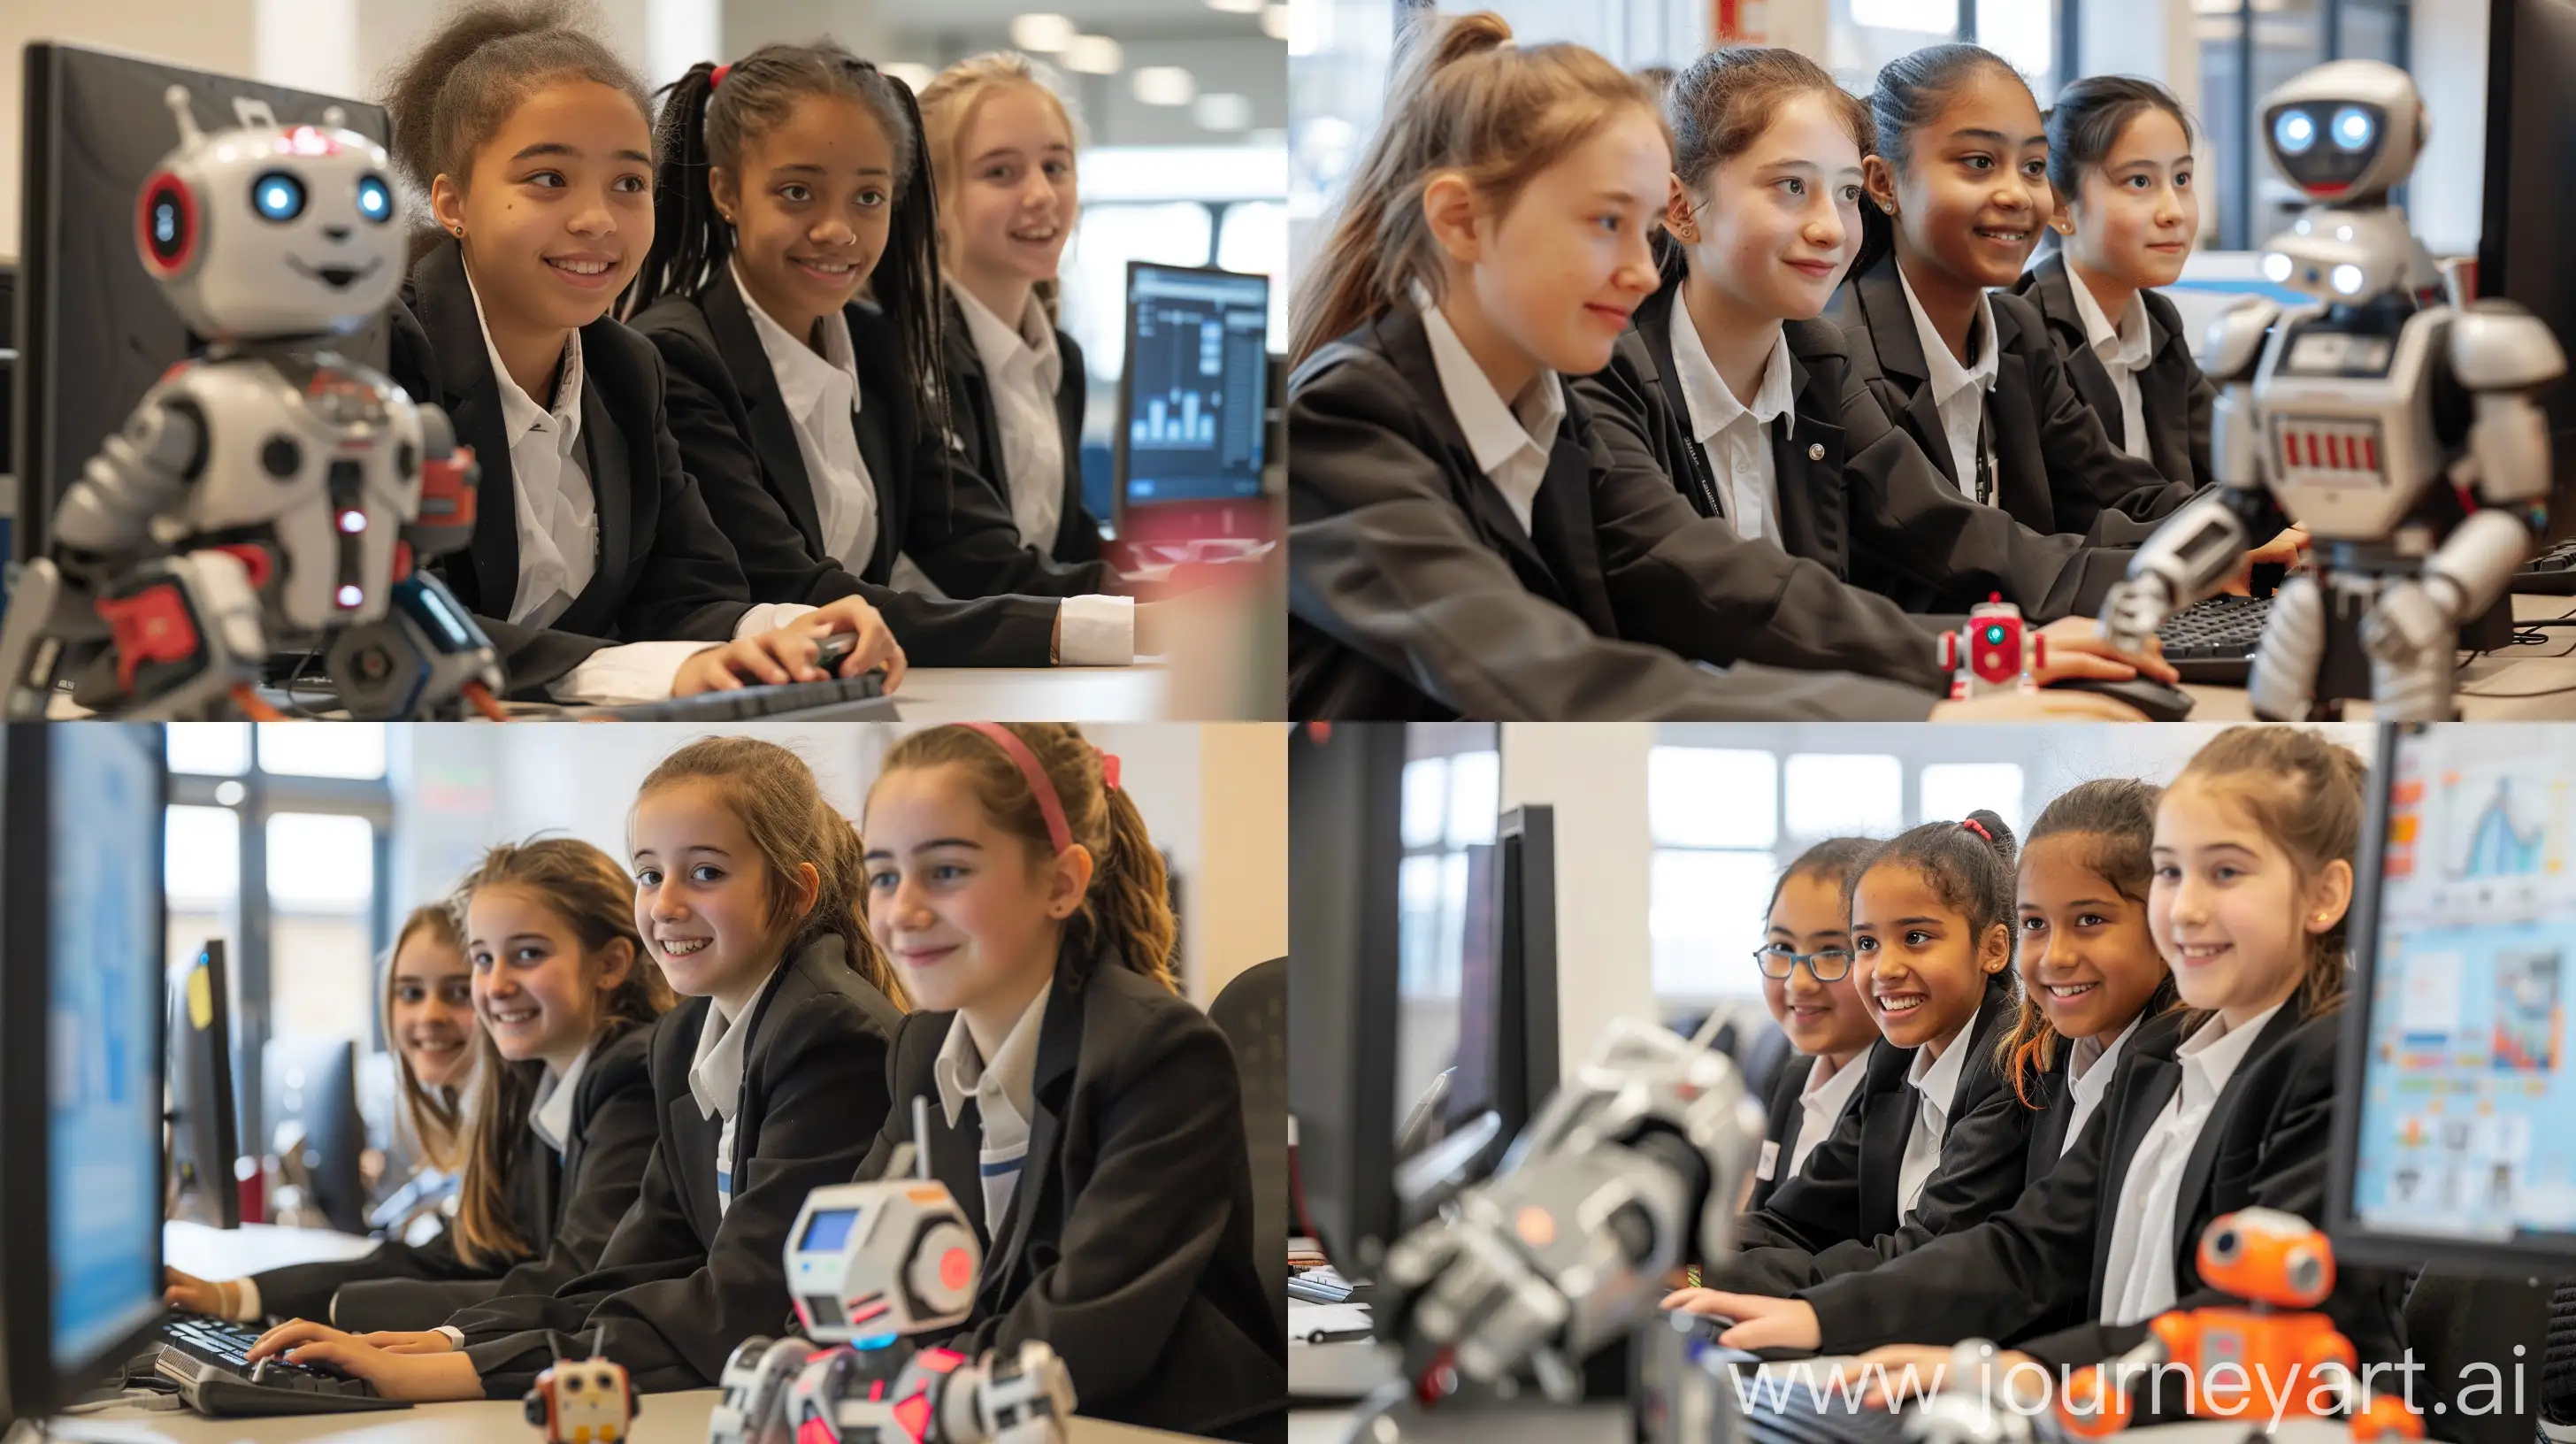 Three-British-High-School-Girls-in-Black-Blazers-Smiling-at-Computer-with-Toy-Robot